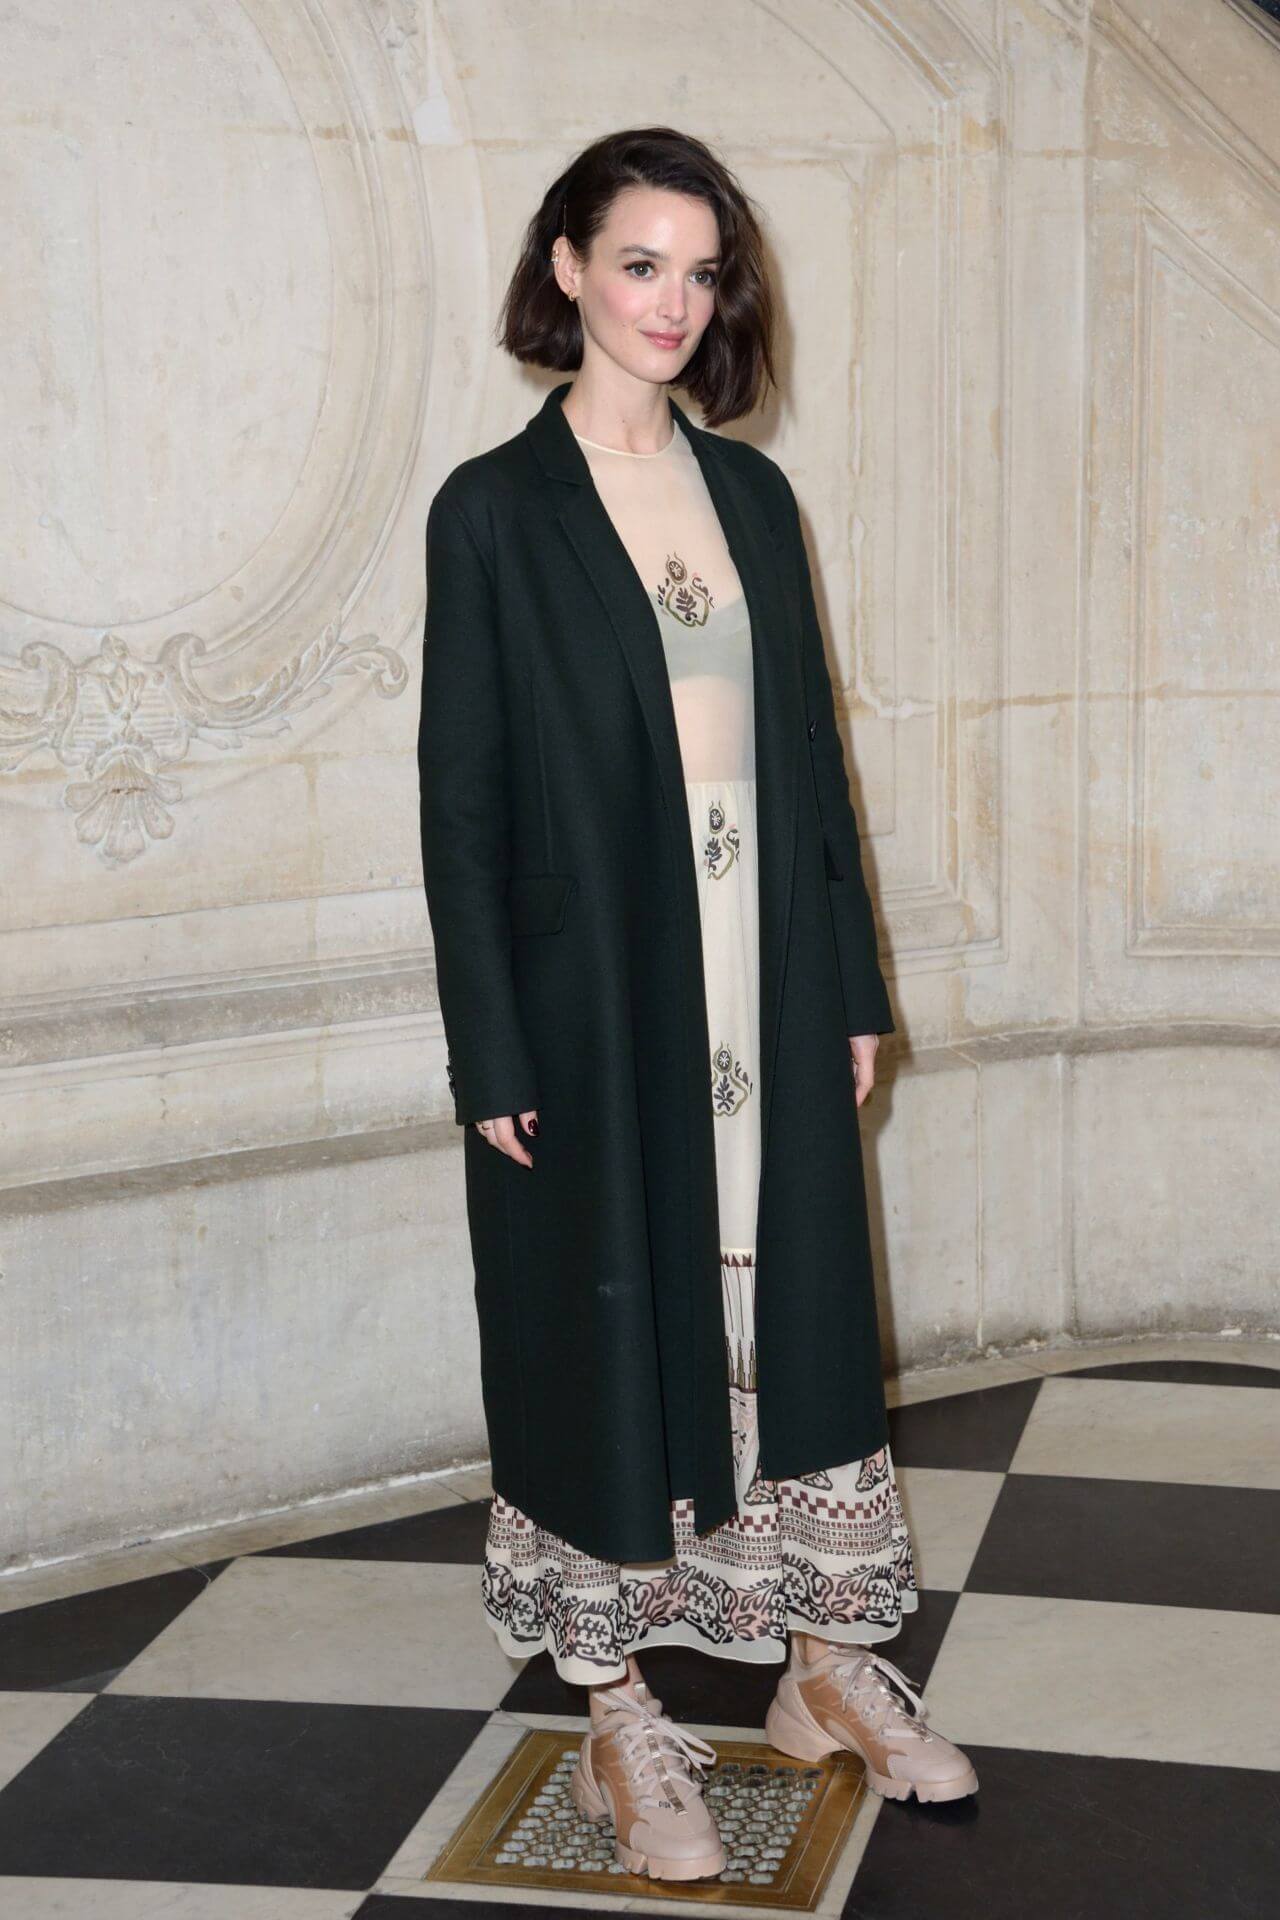 Charlotte Le Bon In Black Long Overcoat Under Printed Long Dress At Christian Dior Fashion Show in Paris